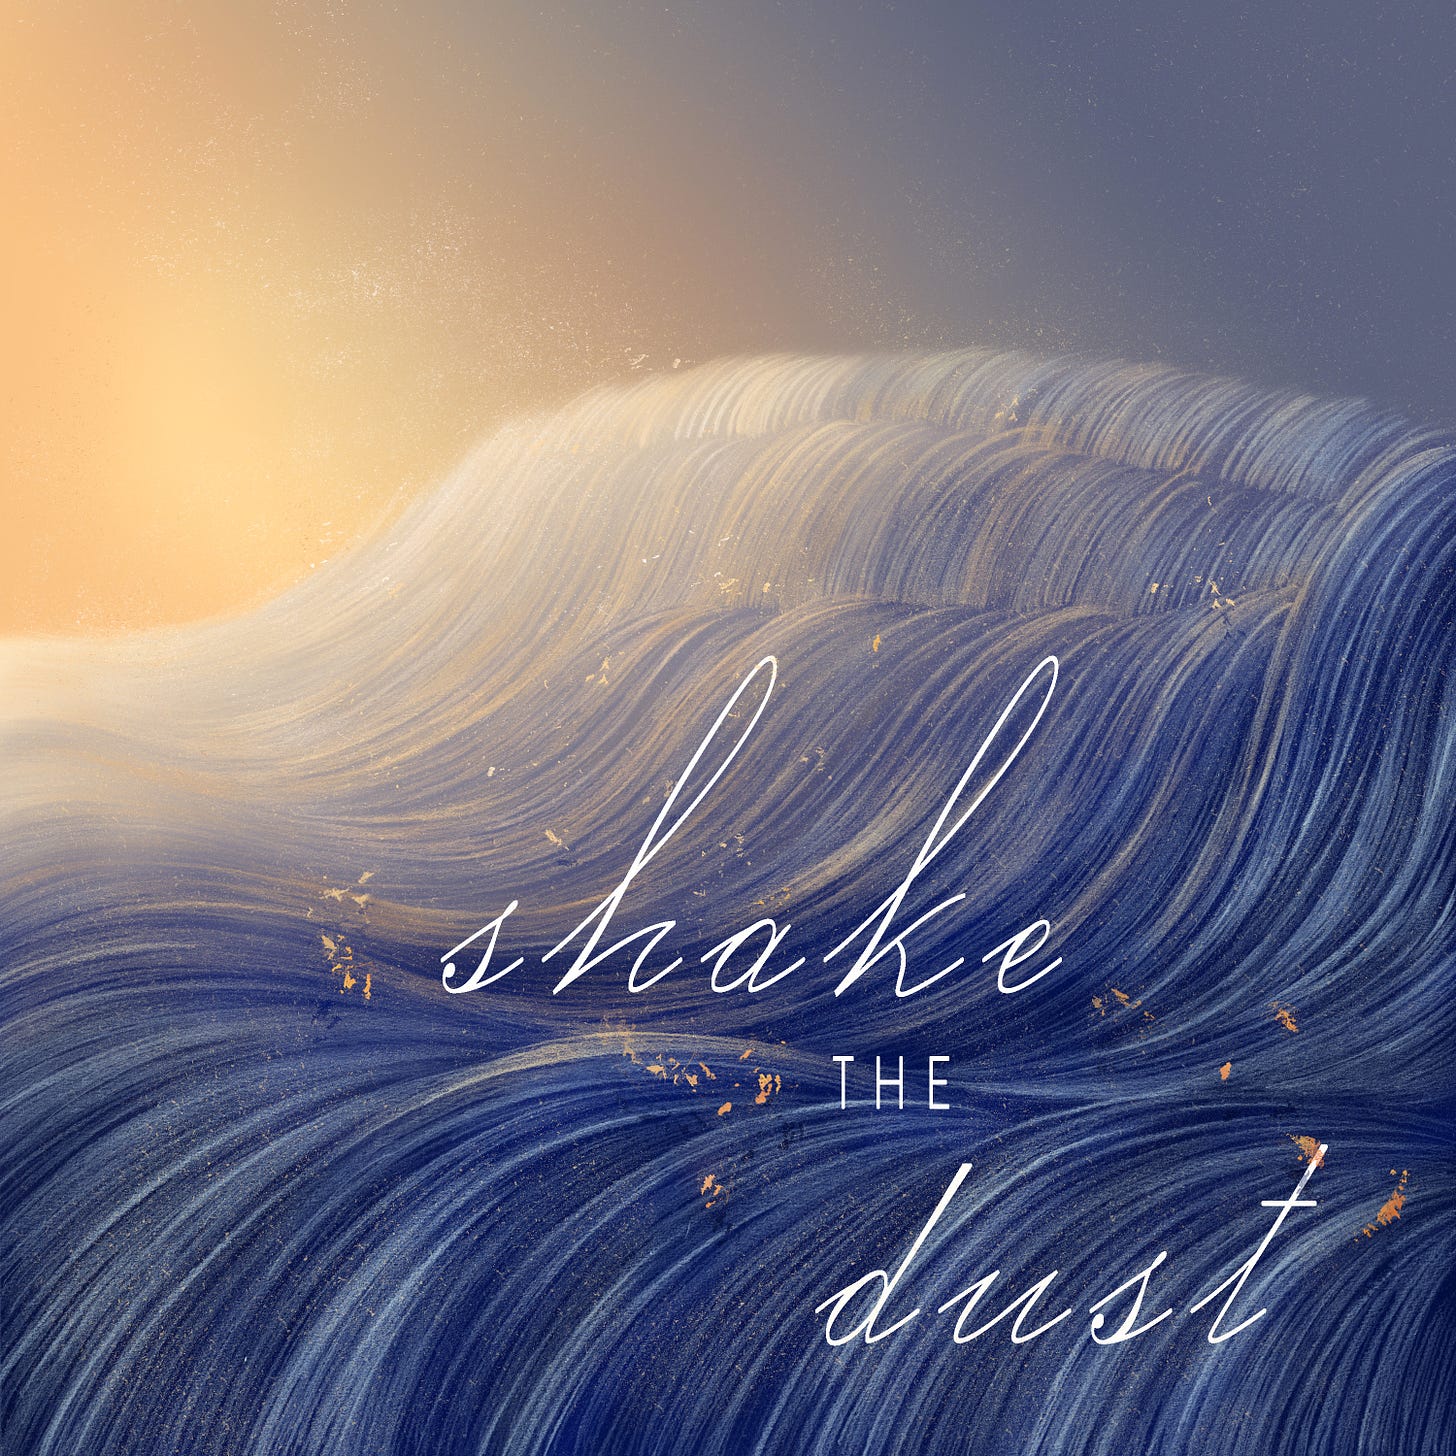 A square image. It is a somewhat abstract Illustration in warm, bright colors of a blue and white landscape with flecks of orange. The landscape itself is undulating in about 4 waves descending from the top right to bottom left corners of the image. The sun is partially visible on the top left and the sky is blue. White, cursive lettering spells out “Shake the Dust” across the ground.